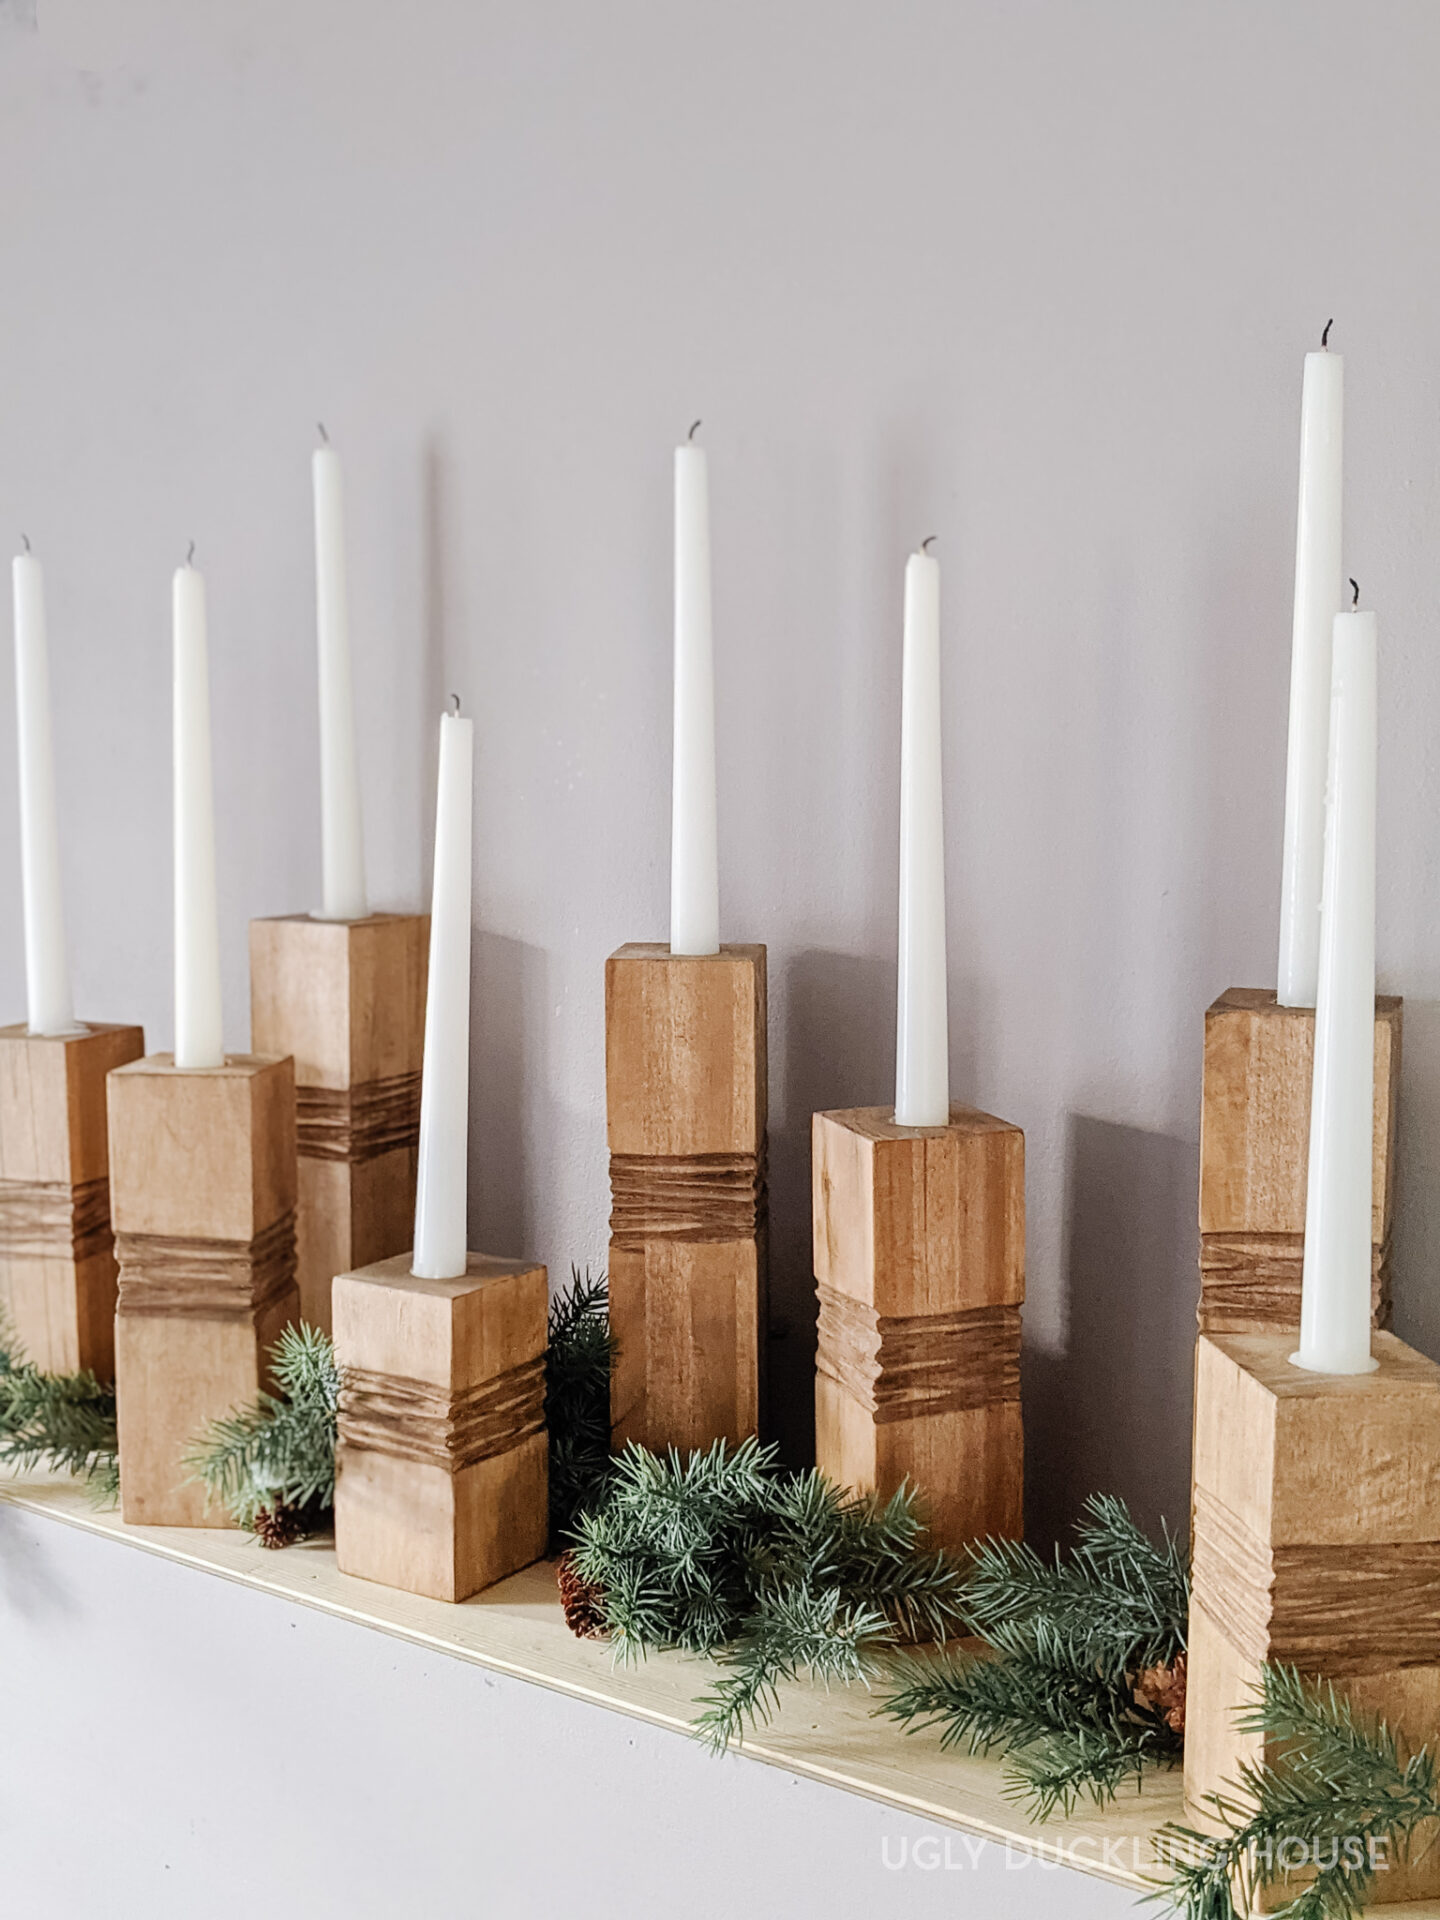 using wax to position tapered candles vertically for candlesticks